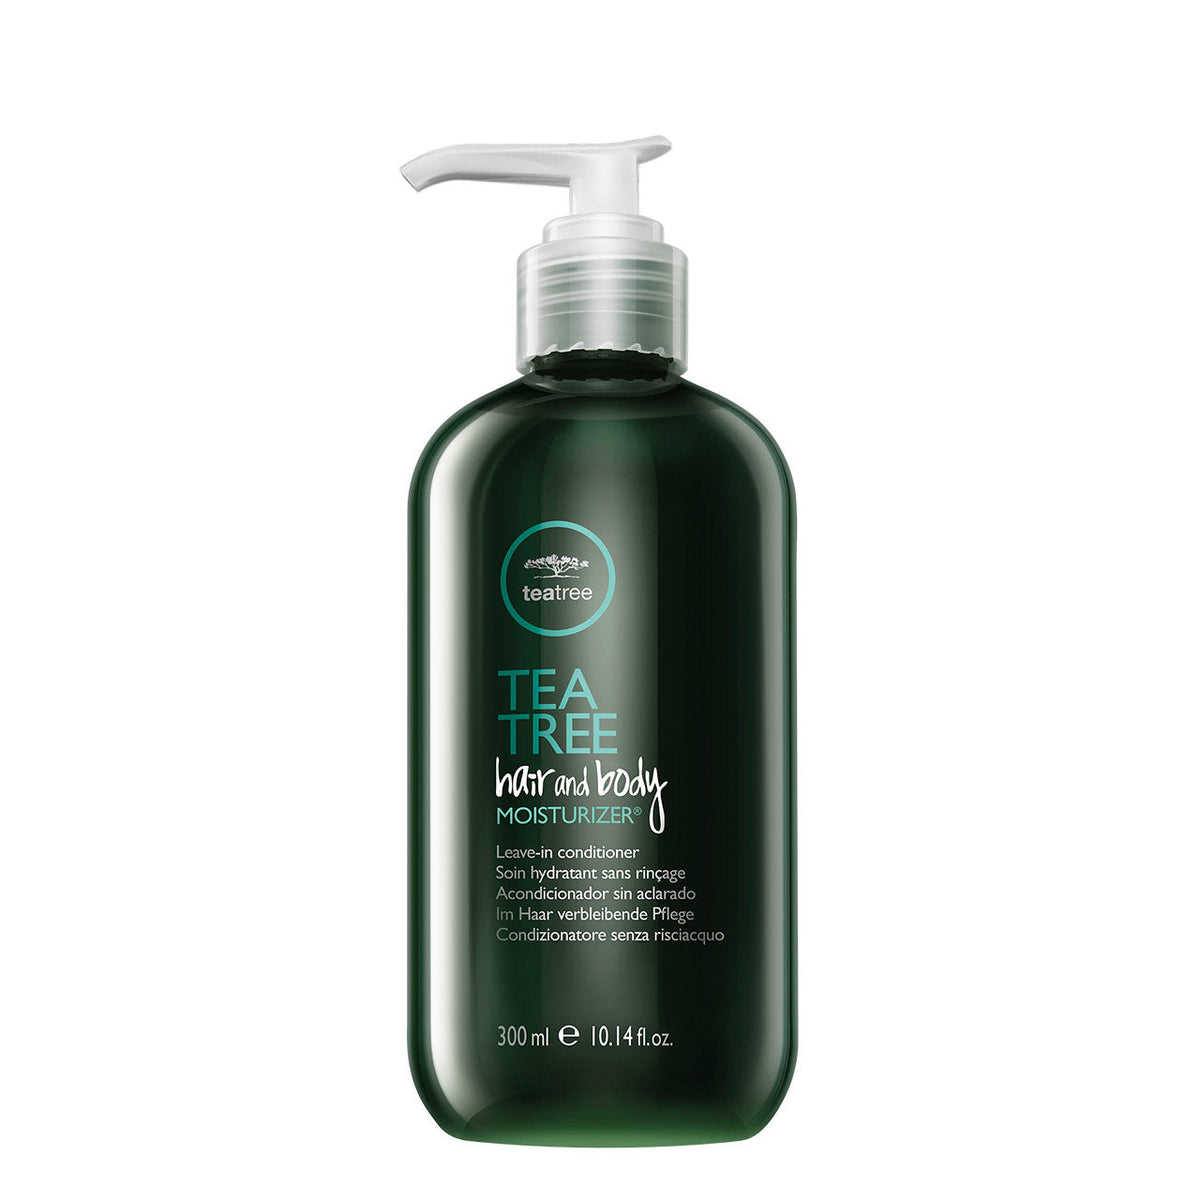 Tea Tree Hair and Body Moisturizer - 300ML - ProCare Outlet by Paul Mitchell